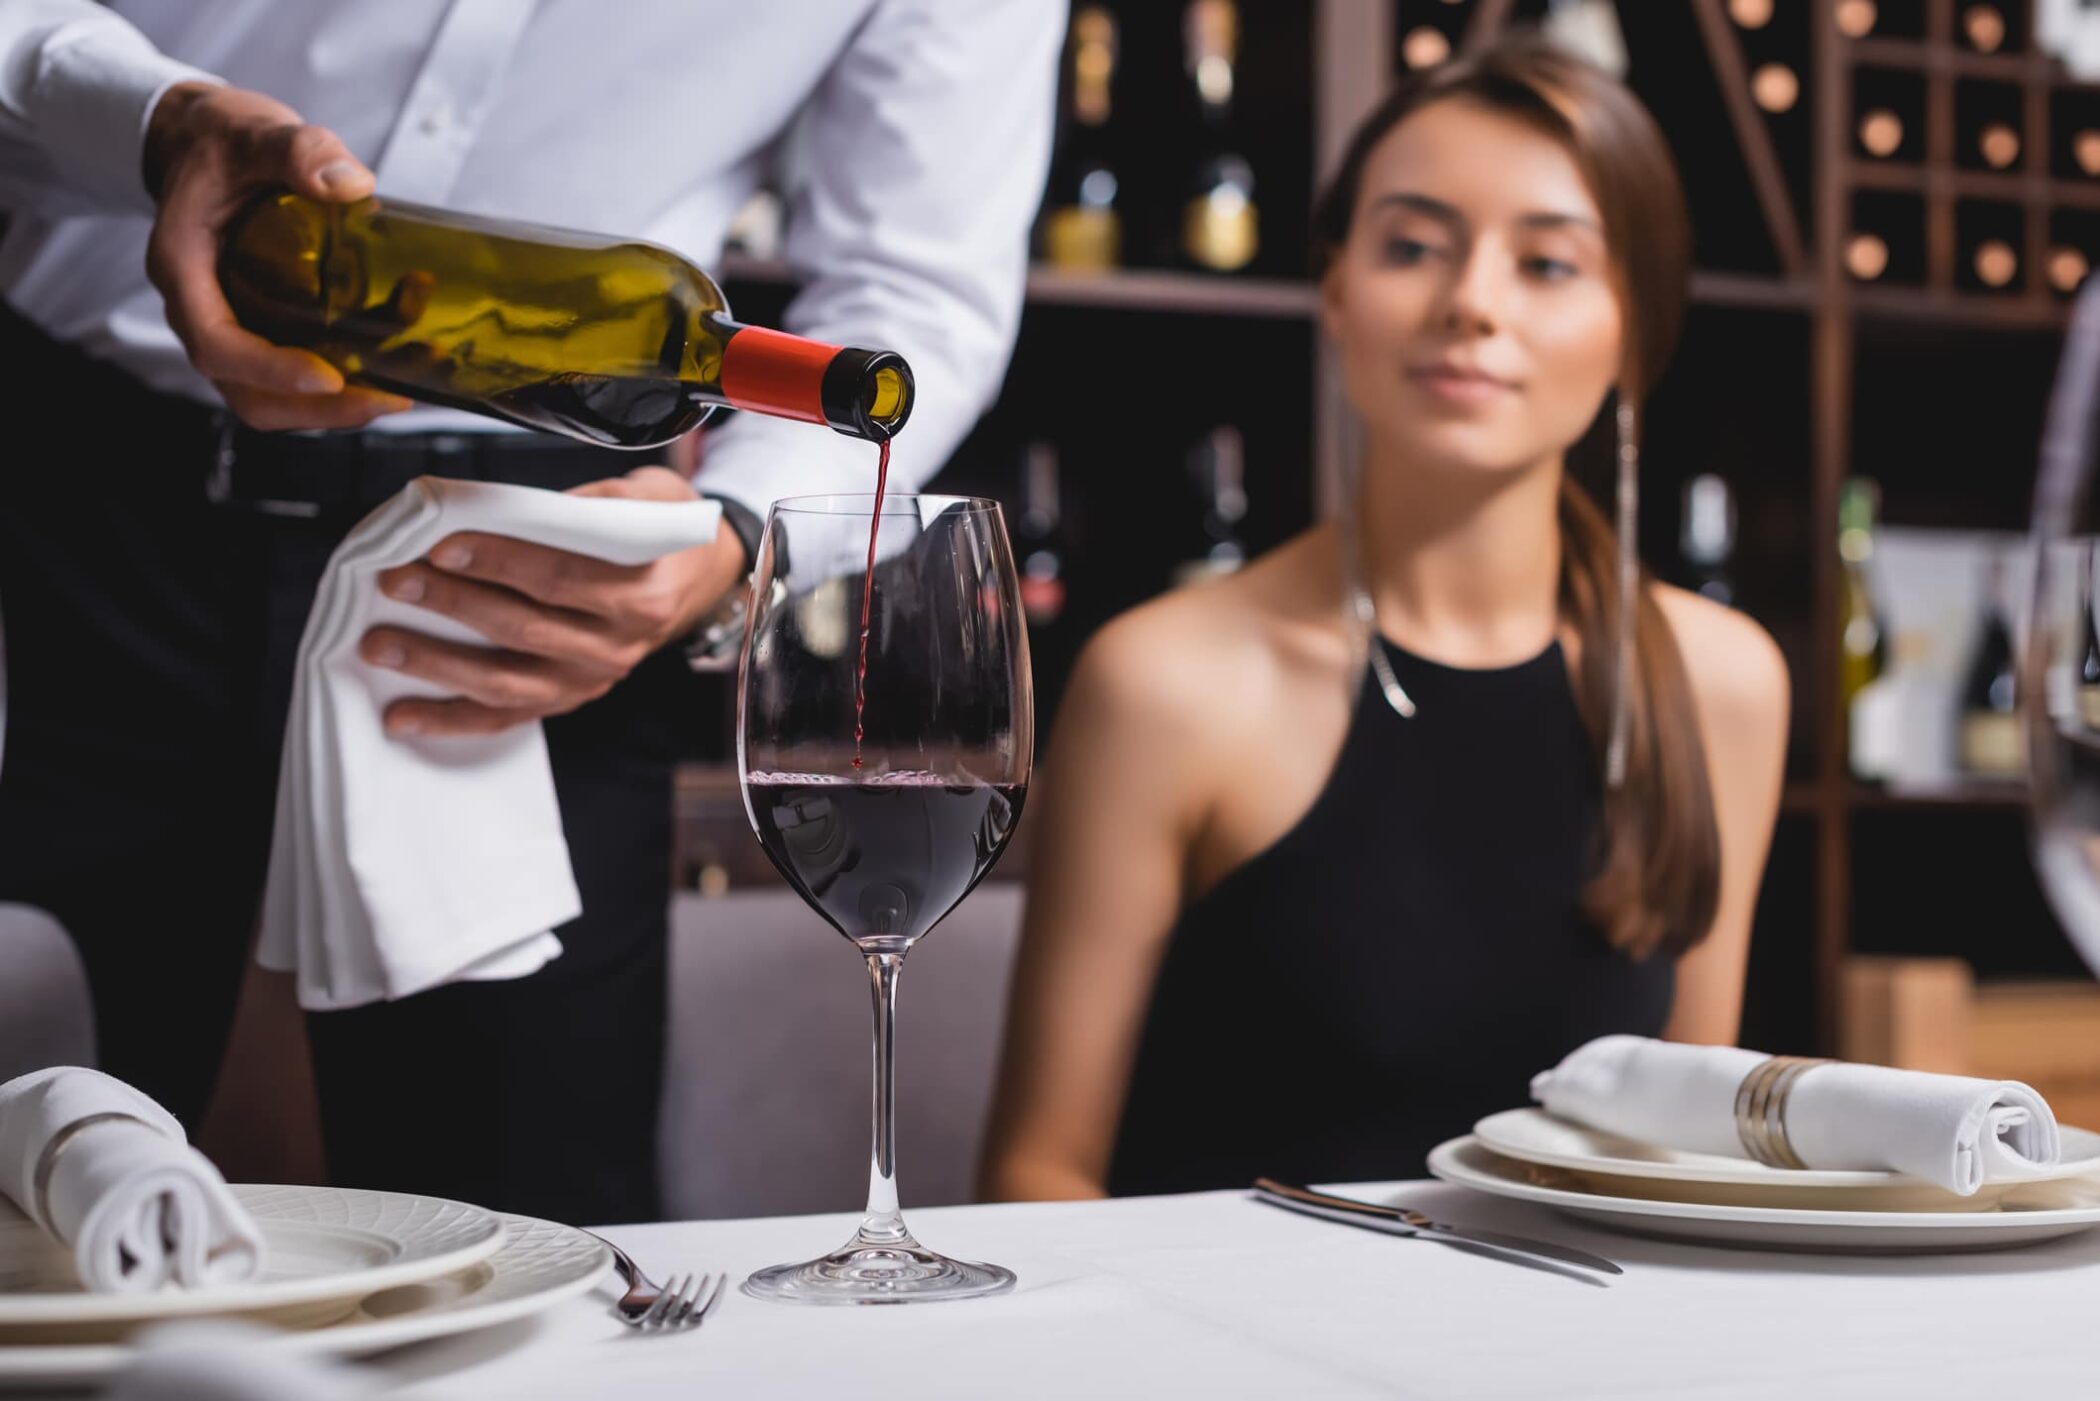 Selective focus of a waiter pouring wine near woman at table in restaurant